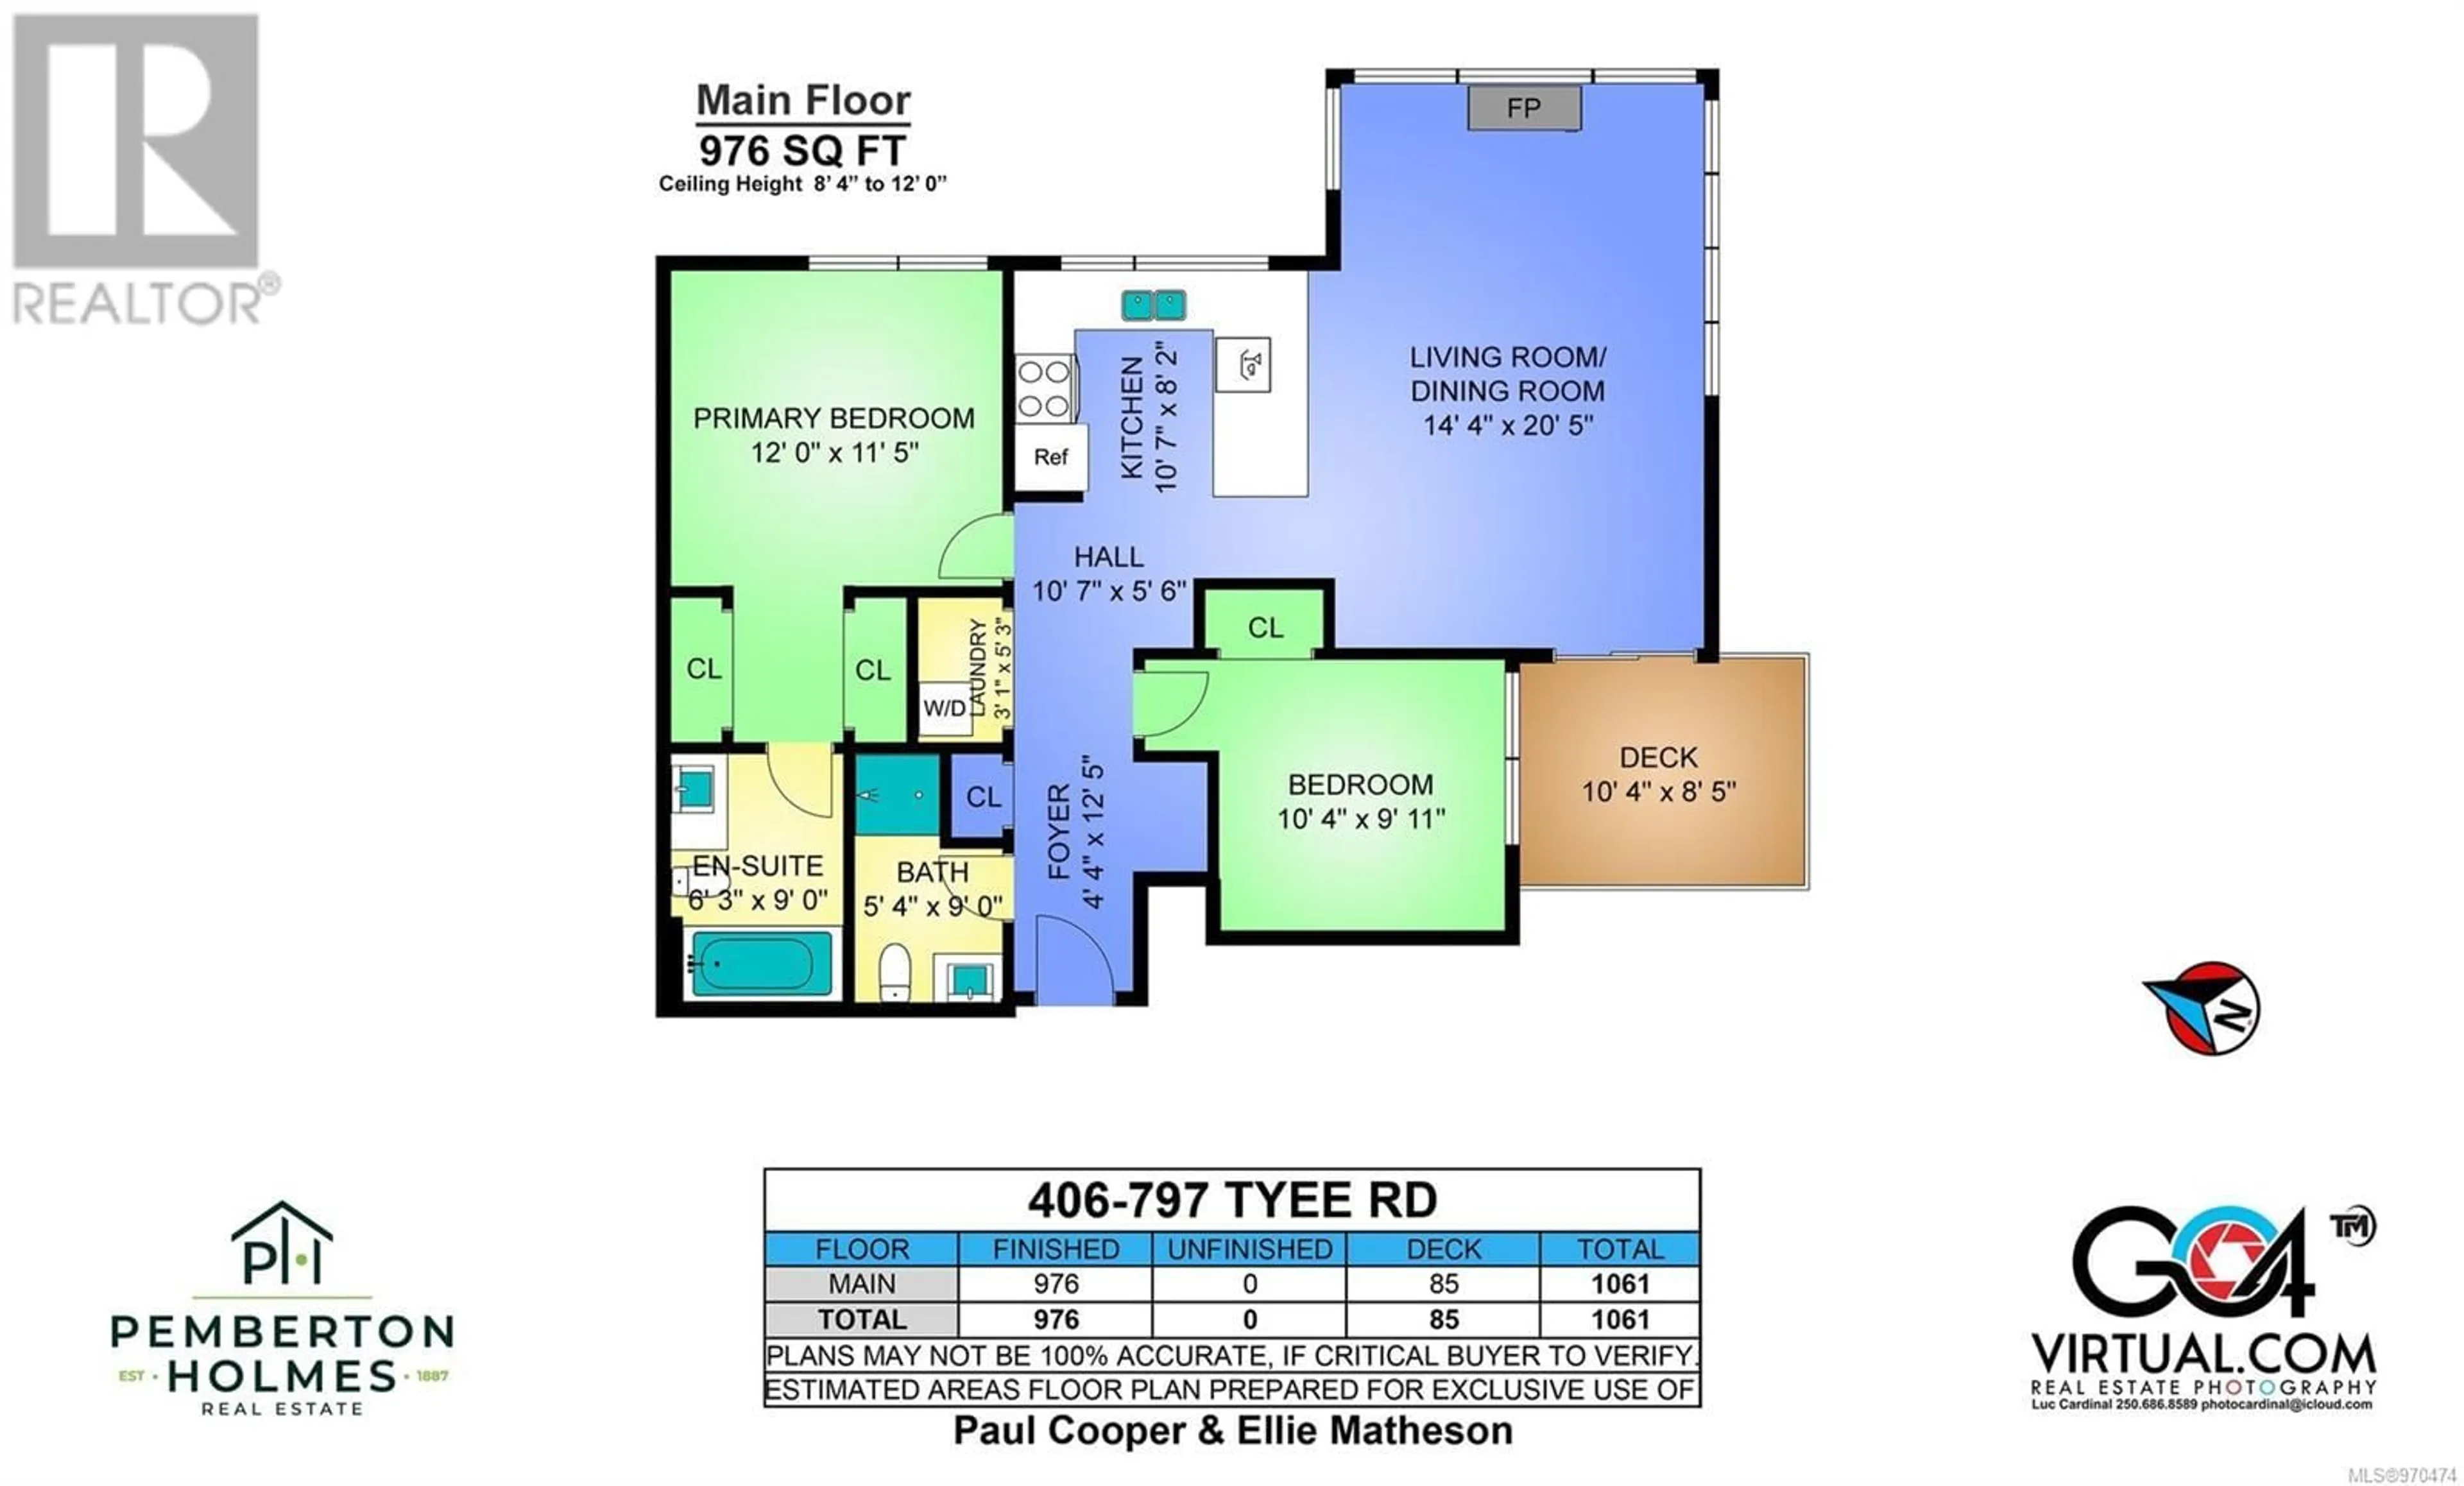 Floor plan for 406 797 Tyee Rd, Victoria British Columbia V9A7R4